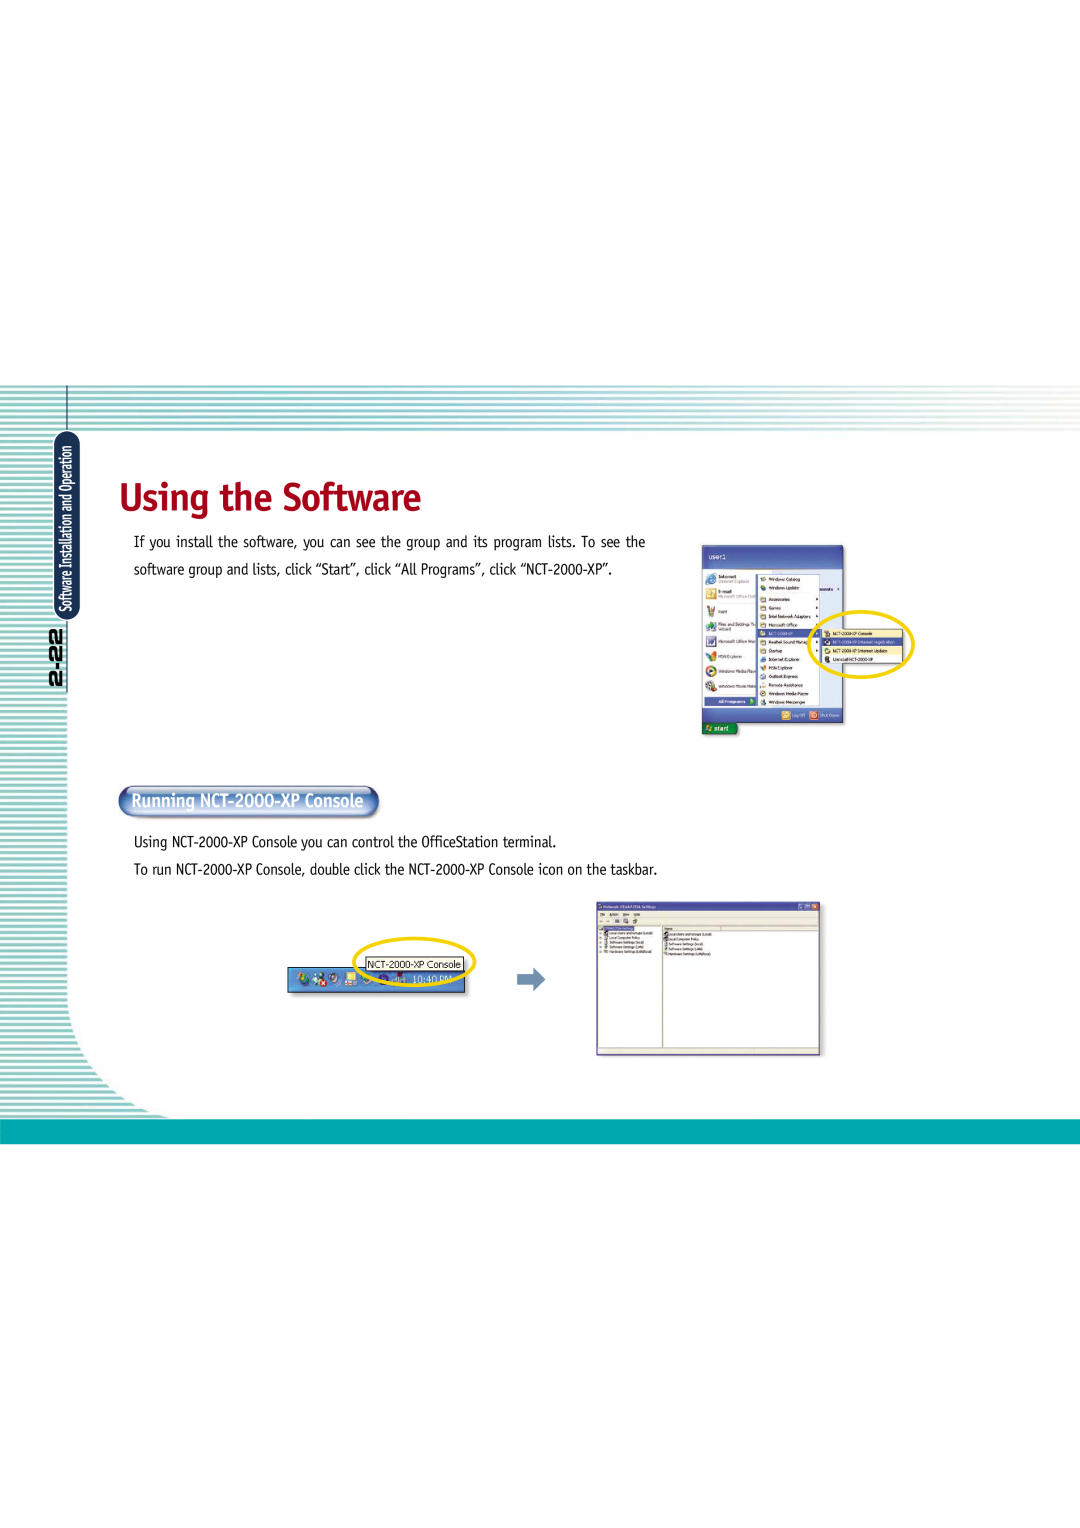 Gateway L110 manual Using the Software, Running NCT-2000-XP Console, 2-22, Software Installation and Operation 